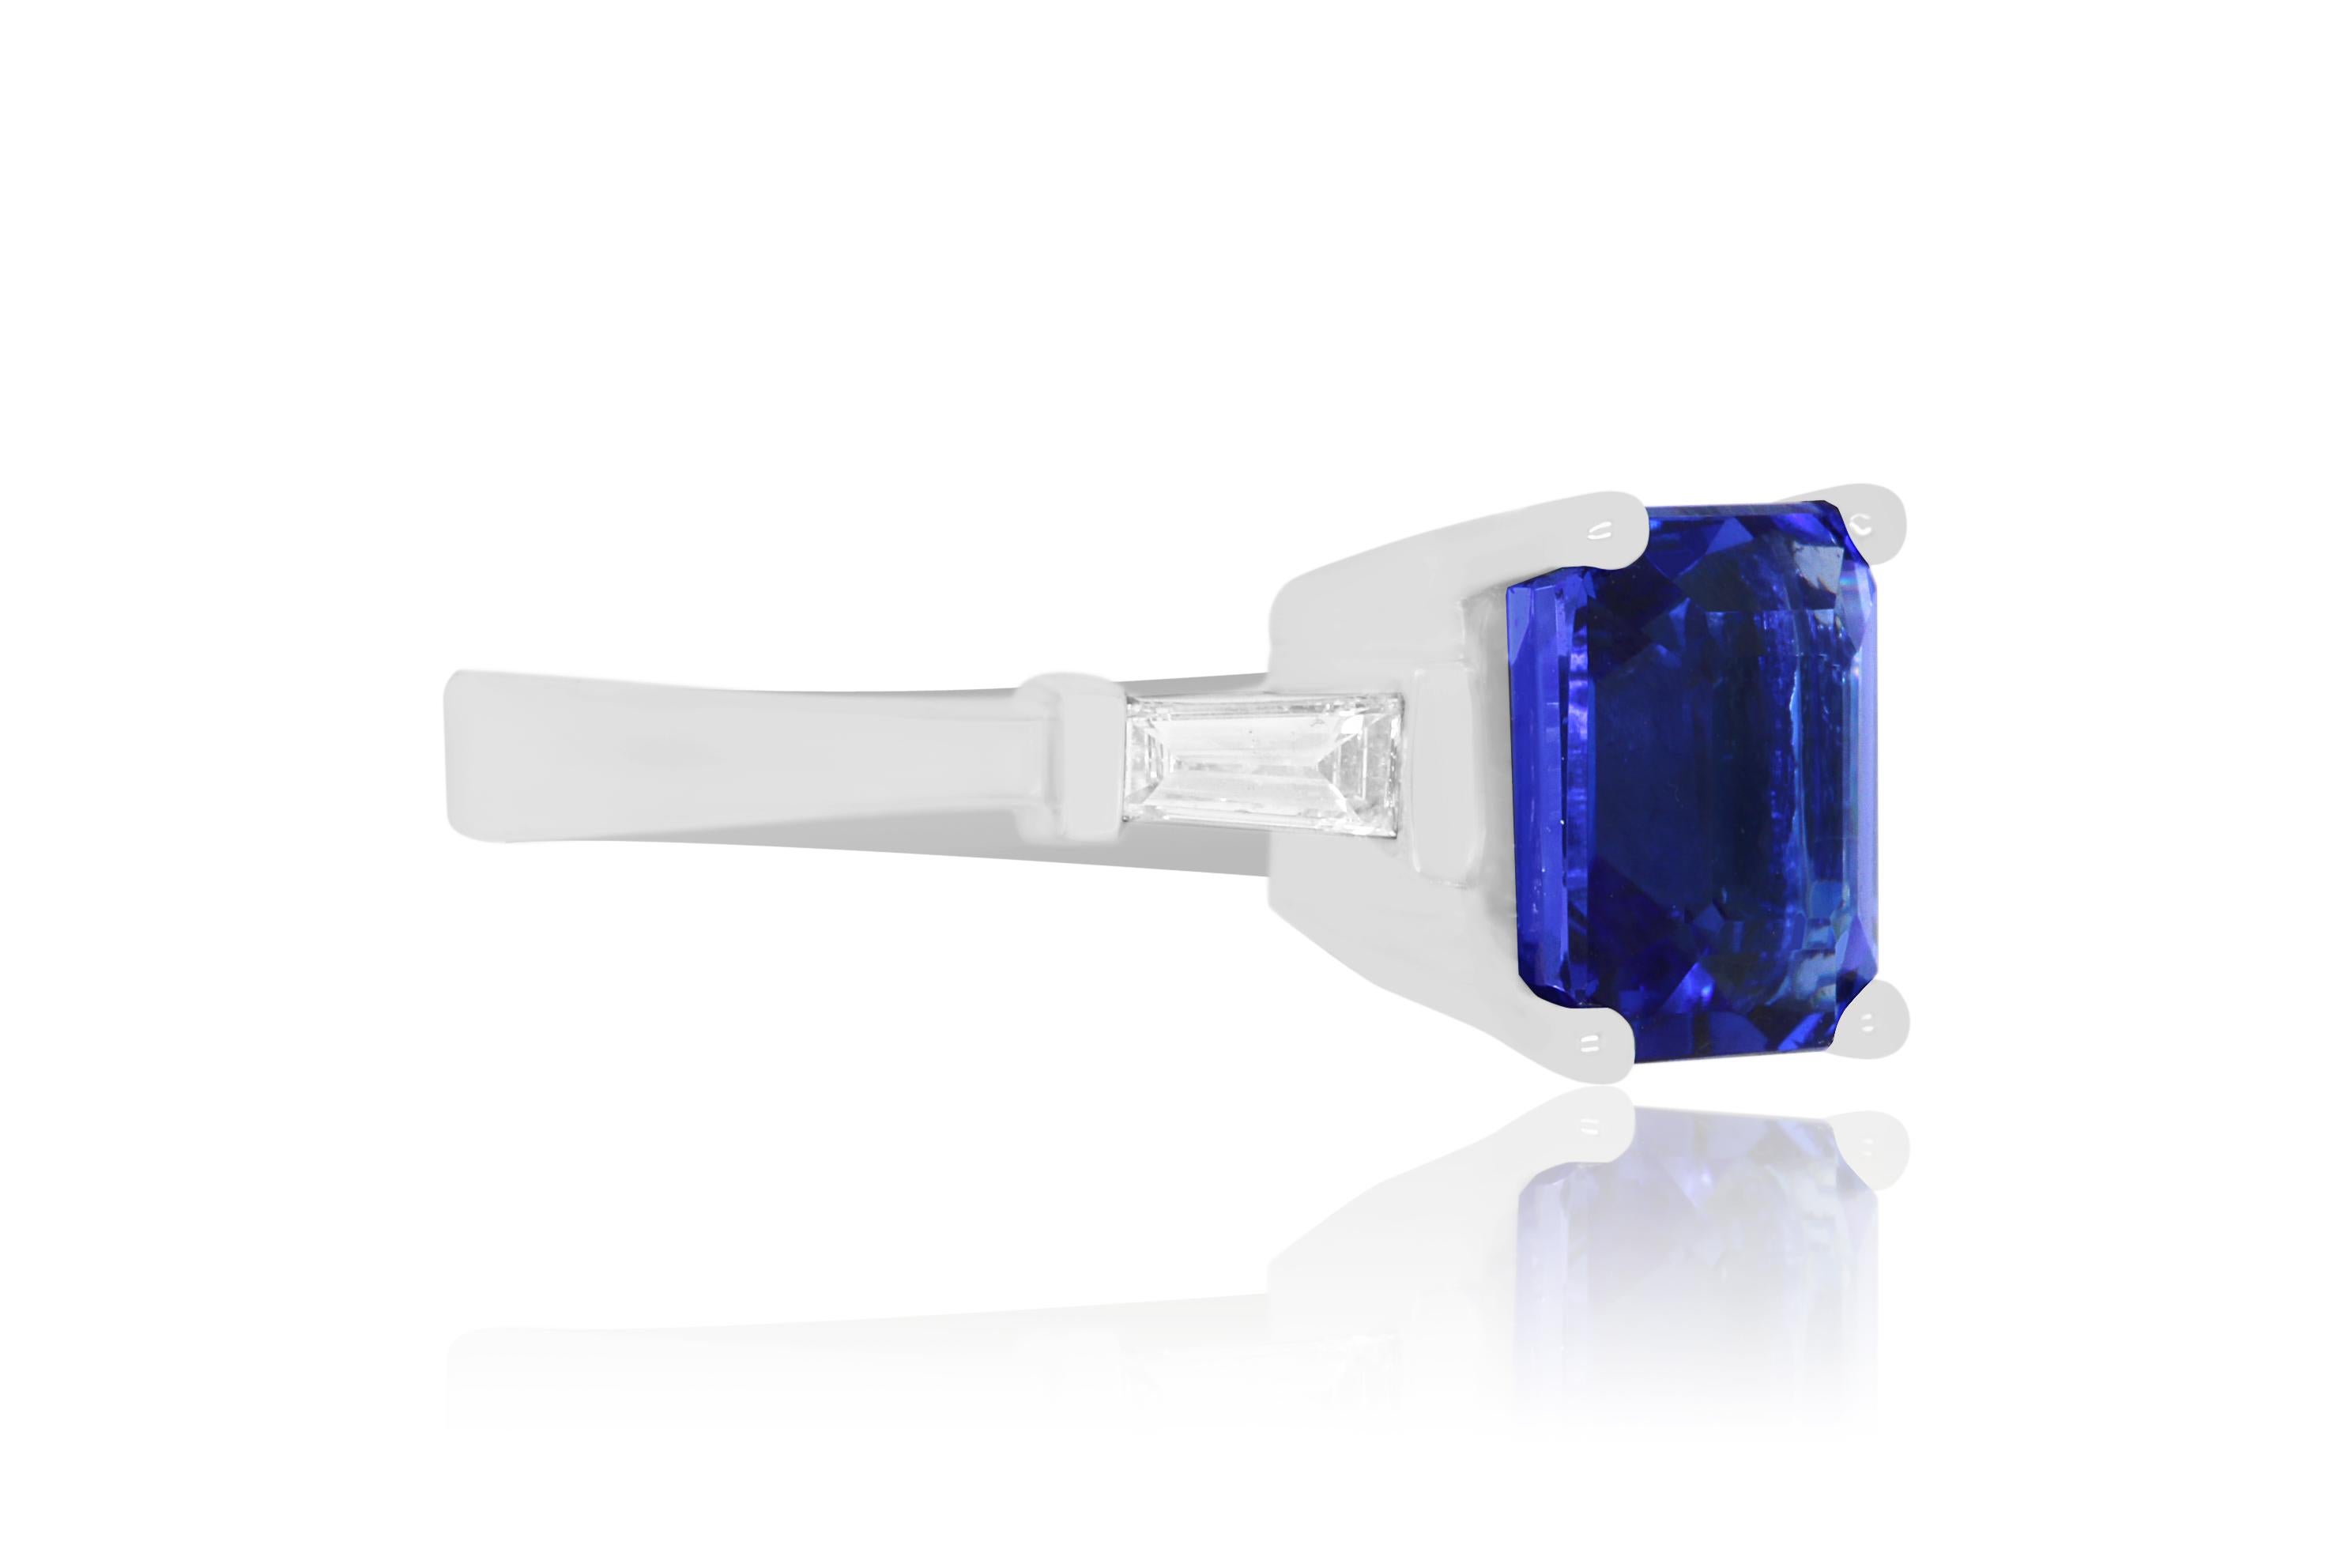 A stunning 4.35 Carat Emerald Cut Tanzanite is perfectly set in a 14K white gold and surrounded on either side by dazzling baguette diamonds totaling 0.36 Carats.

Material: 14k White Gold
Gemstones: 1 Emerald Cut Tanzanite at 4.35 Carats.